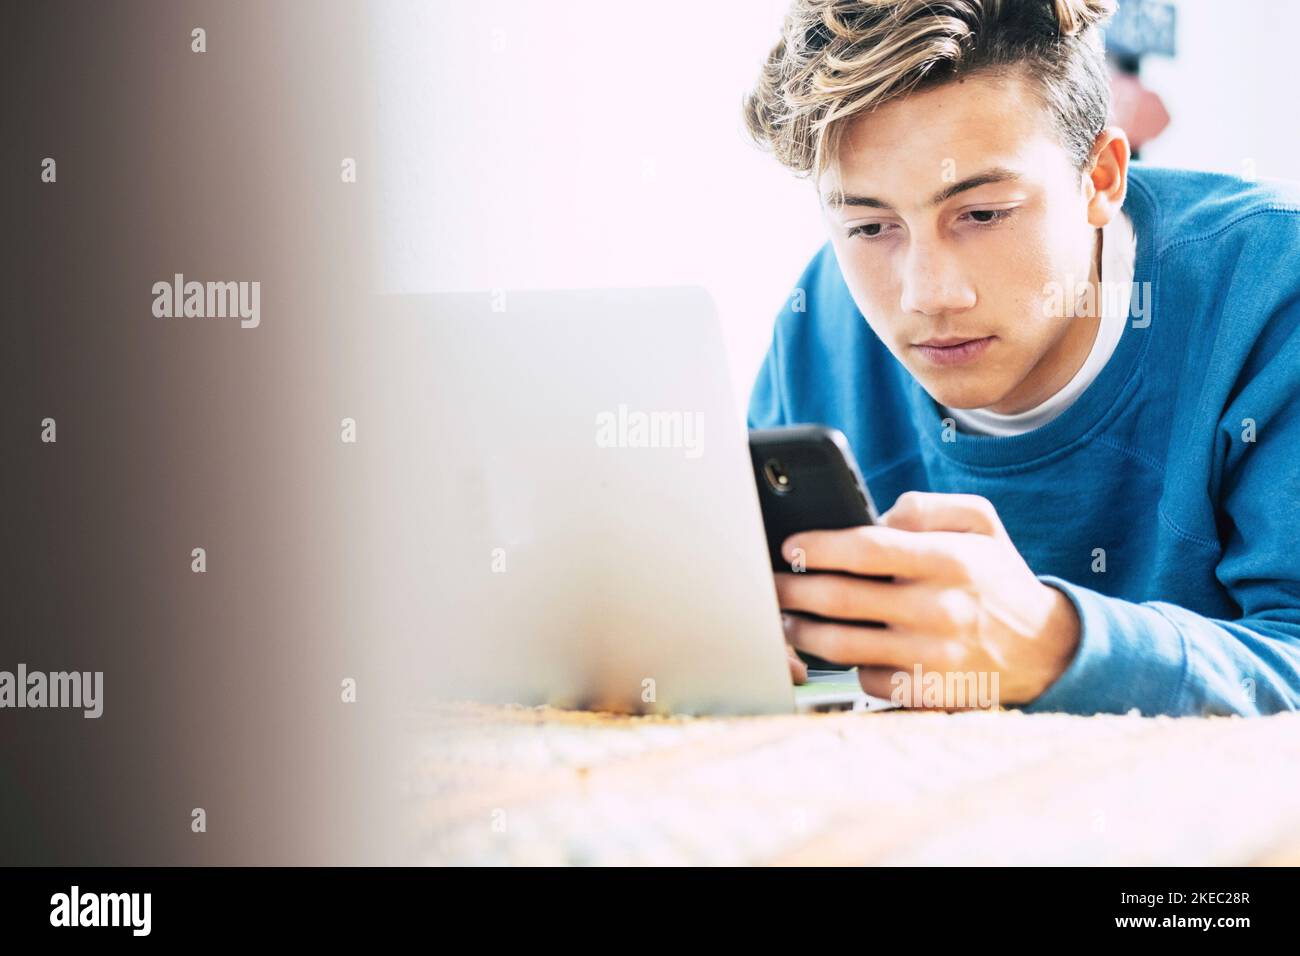 teenager or young man using phone at home on the sofa or on the bed alone having fun and enjoying. Millennial surfing the net with laptop and smartphone and with technologic device Stock Photo